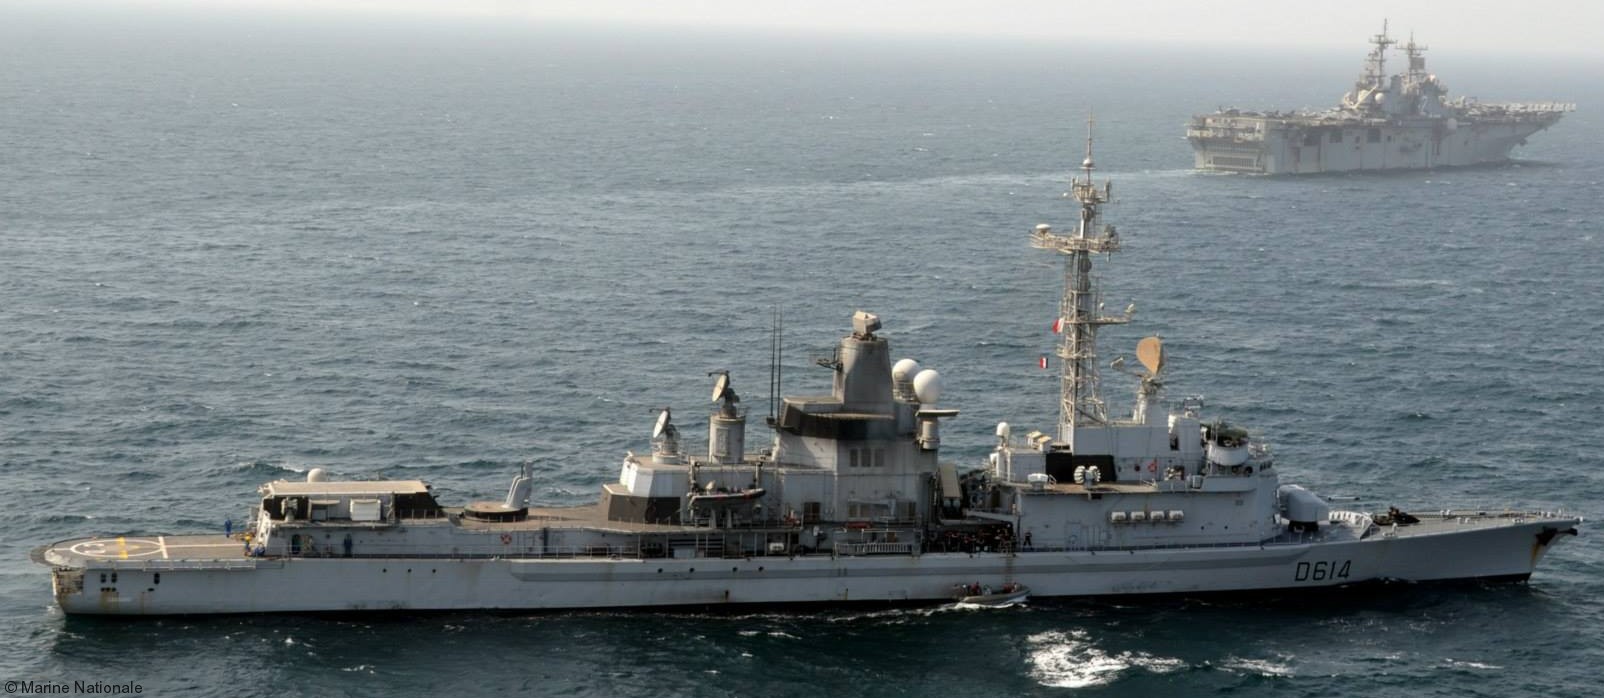 d-614 fs cassard f70aa class guided missile frigate ffgh ddg french navy marine nationale 18